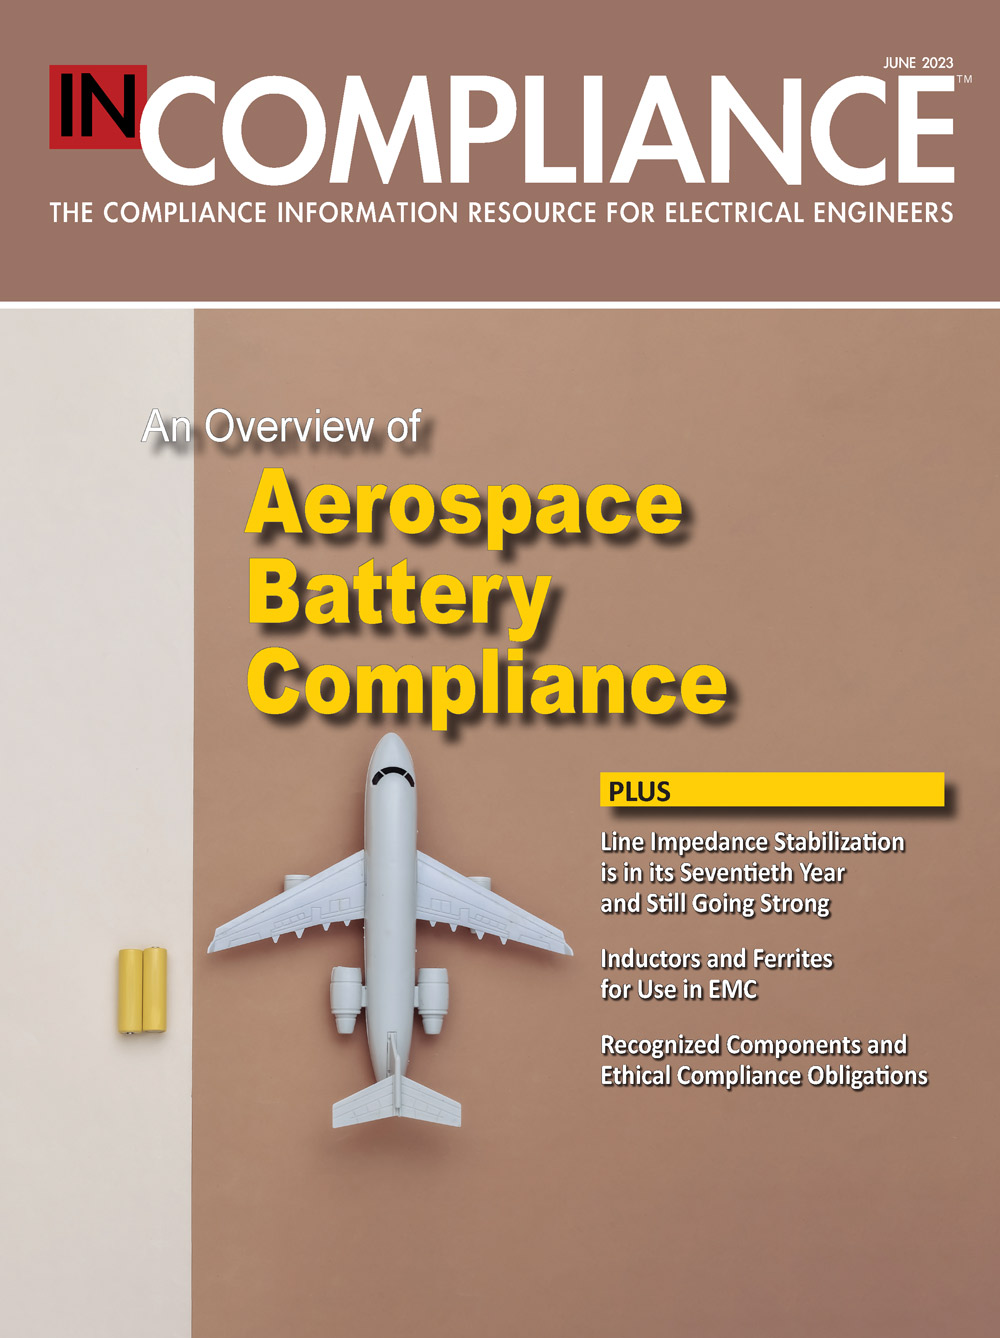 In Compliance June 2023 cover